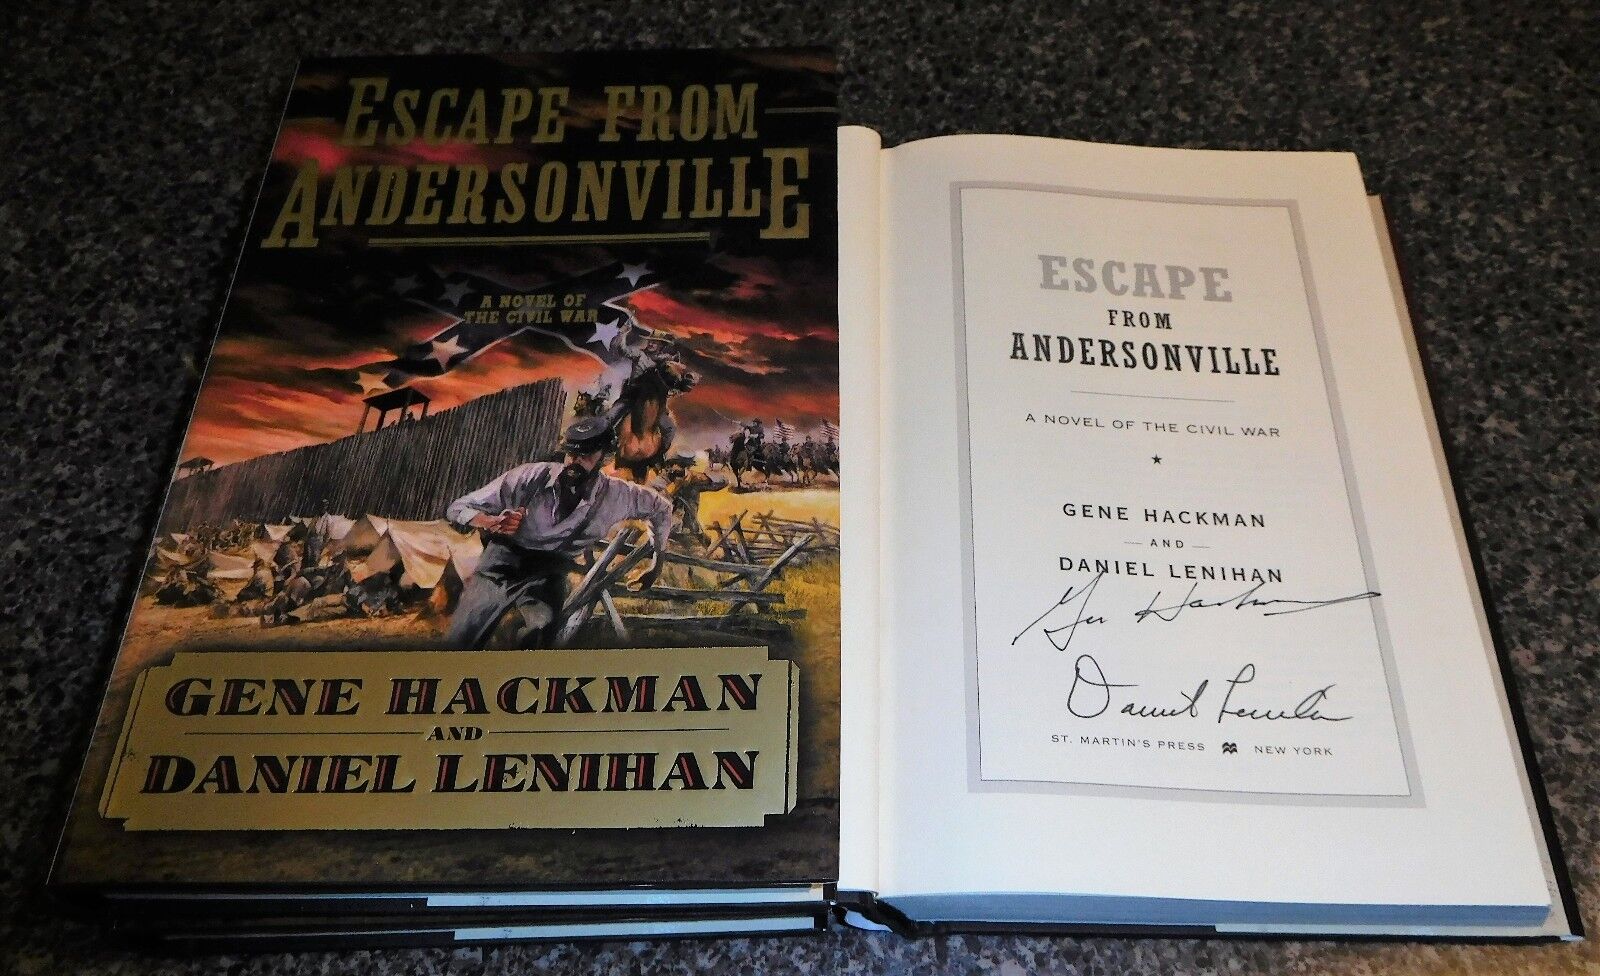 GENE HACKMAN SIGNED ESCAPE FROM ANDERSONVILLE  BOOK AUTOGRAPH HOOSIERS 